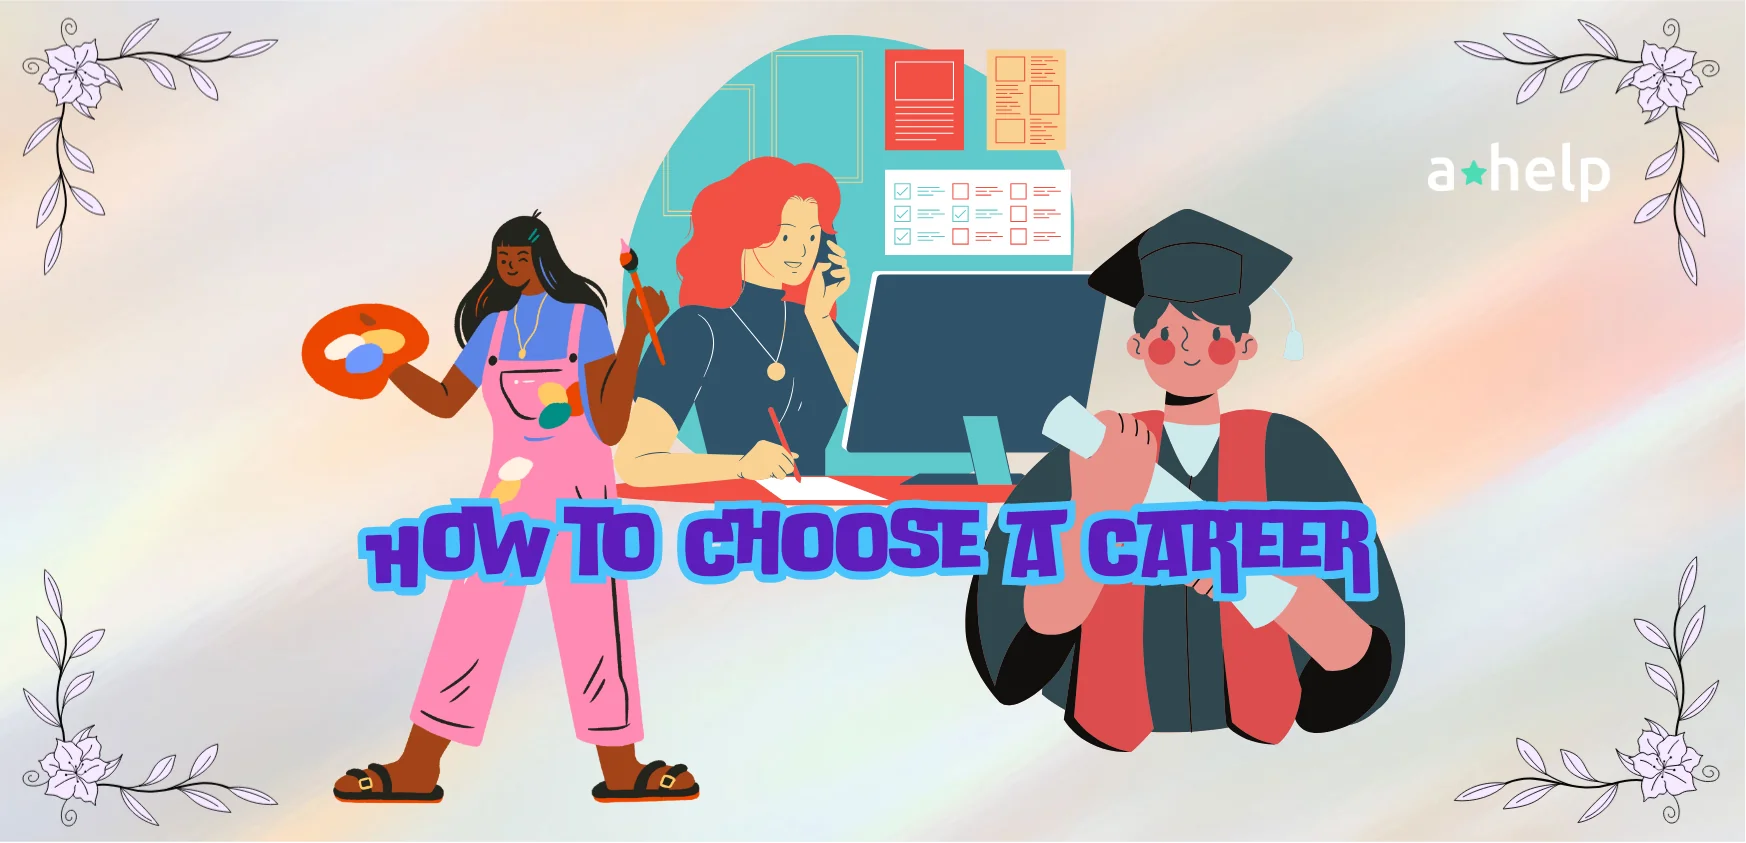 How Teenagers Can Find a Career Suitable for Them